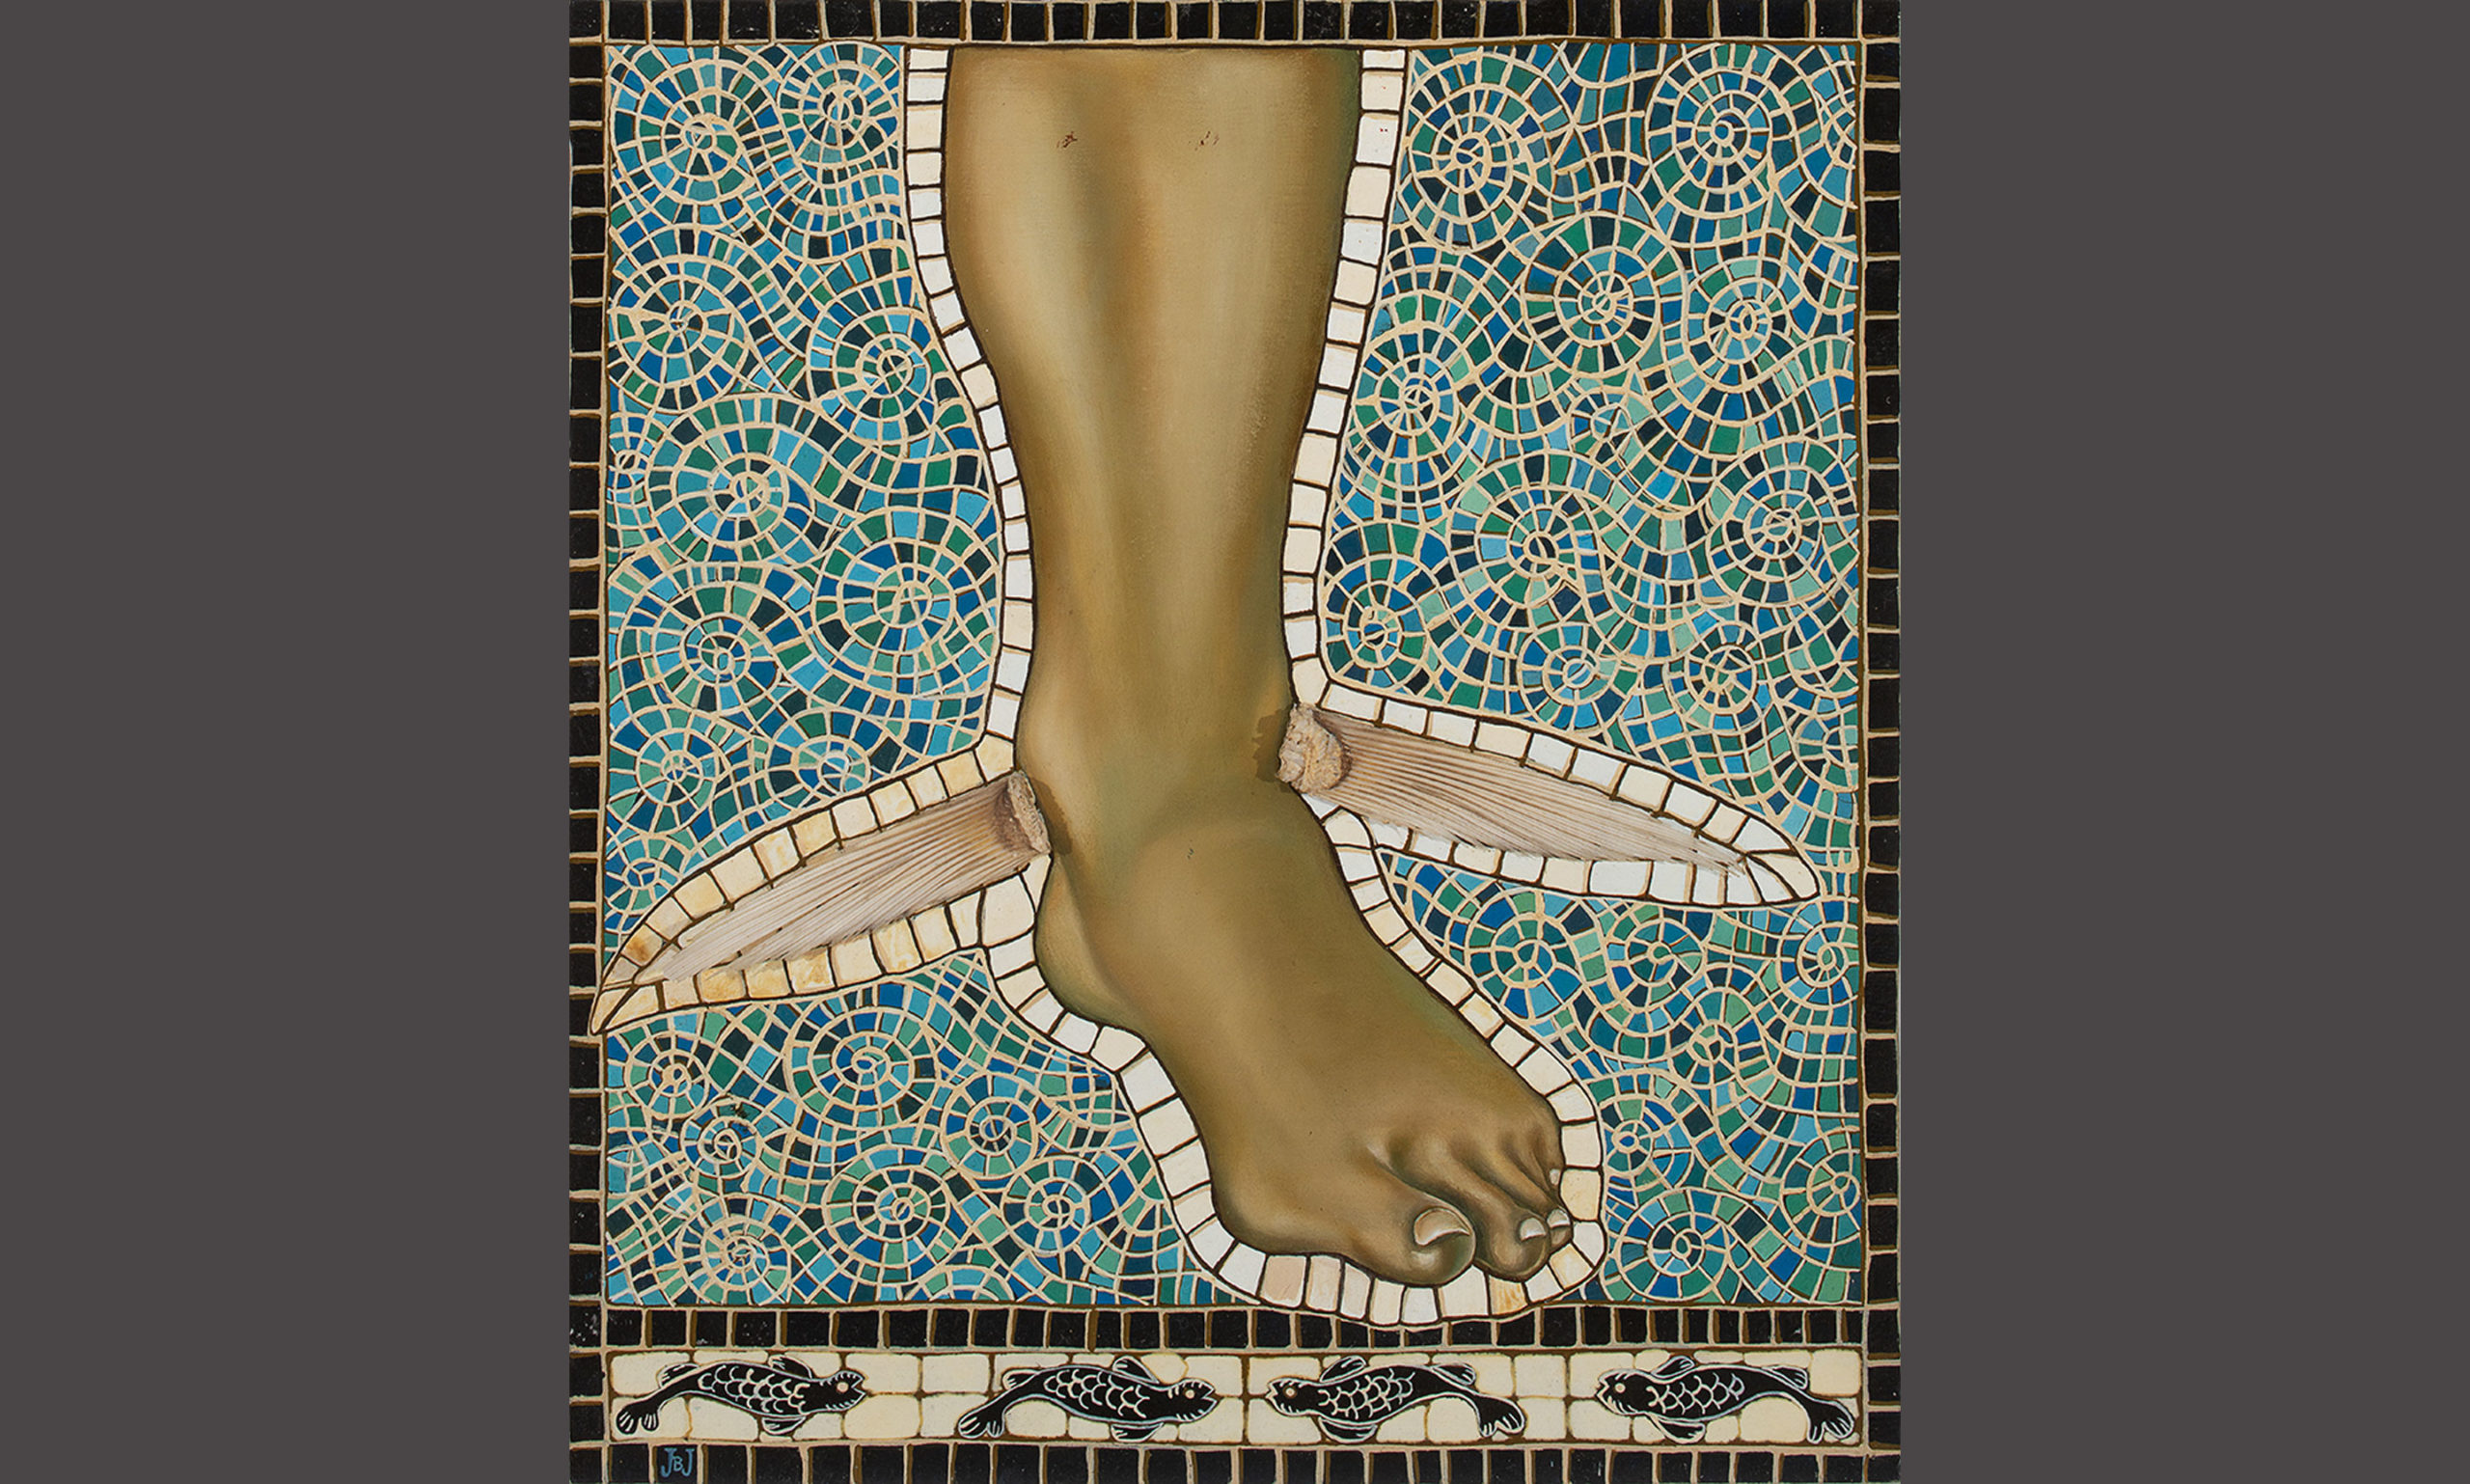 Jacqueline Brito Jorge, Adaptaciones (pies), 1996. Acrylic on canvas with shells and fish fins. Collection of ASU Art Museum. Gift of the Artist. Photography by Craig Smith.